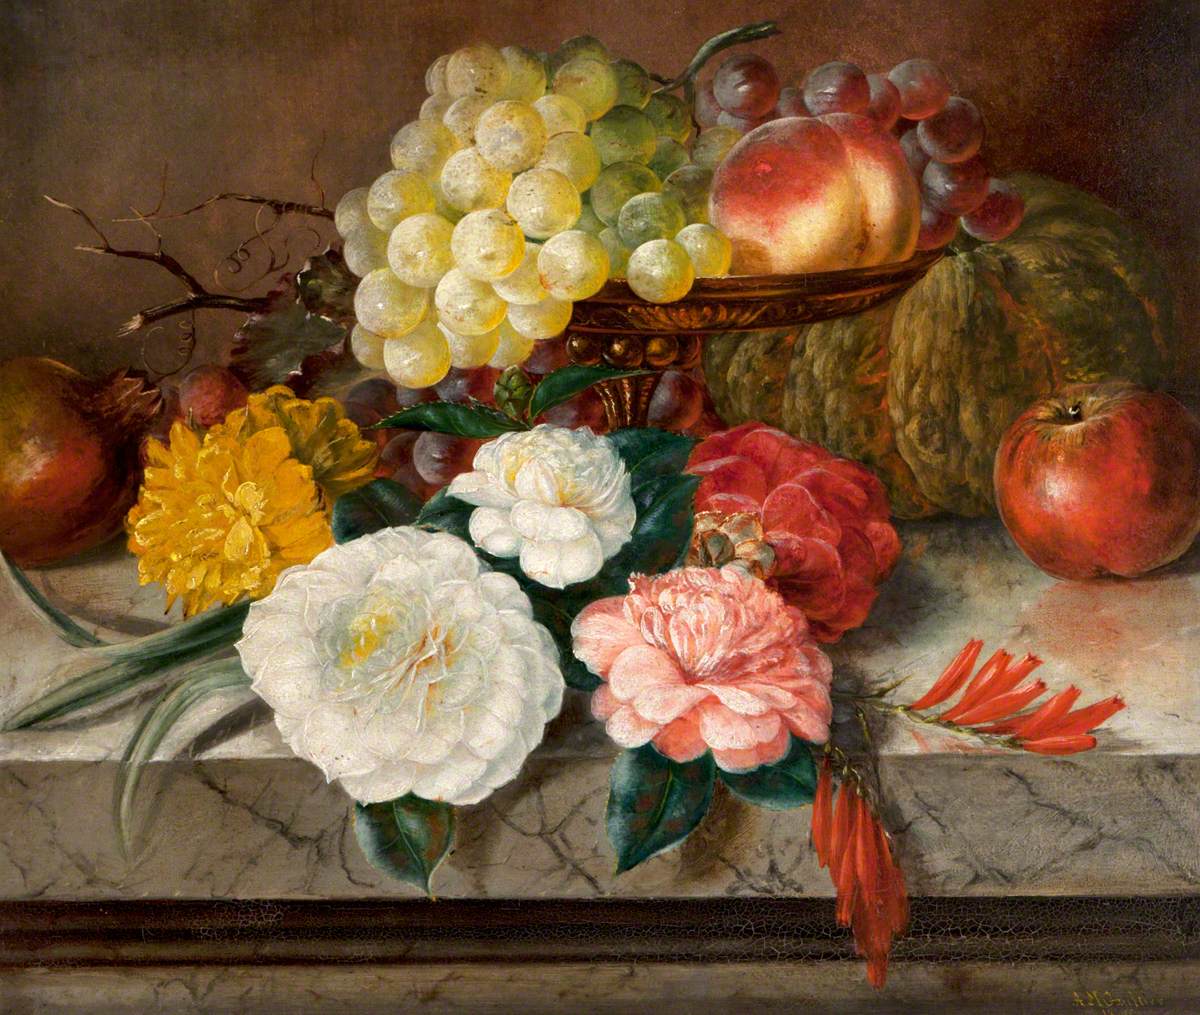 Flowers and Fruit on a Marble Ledge